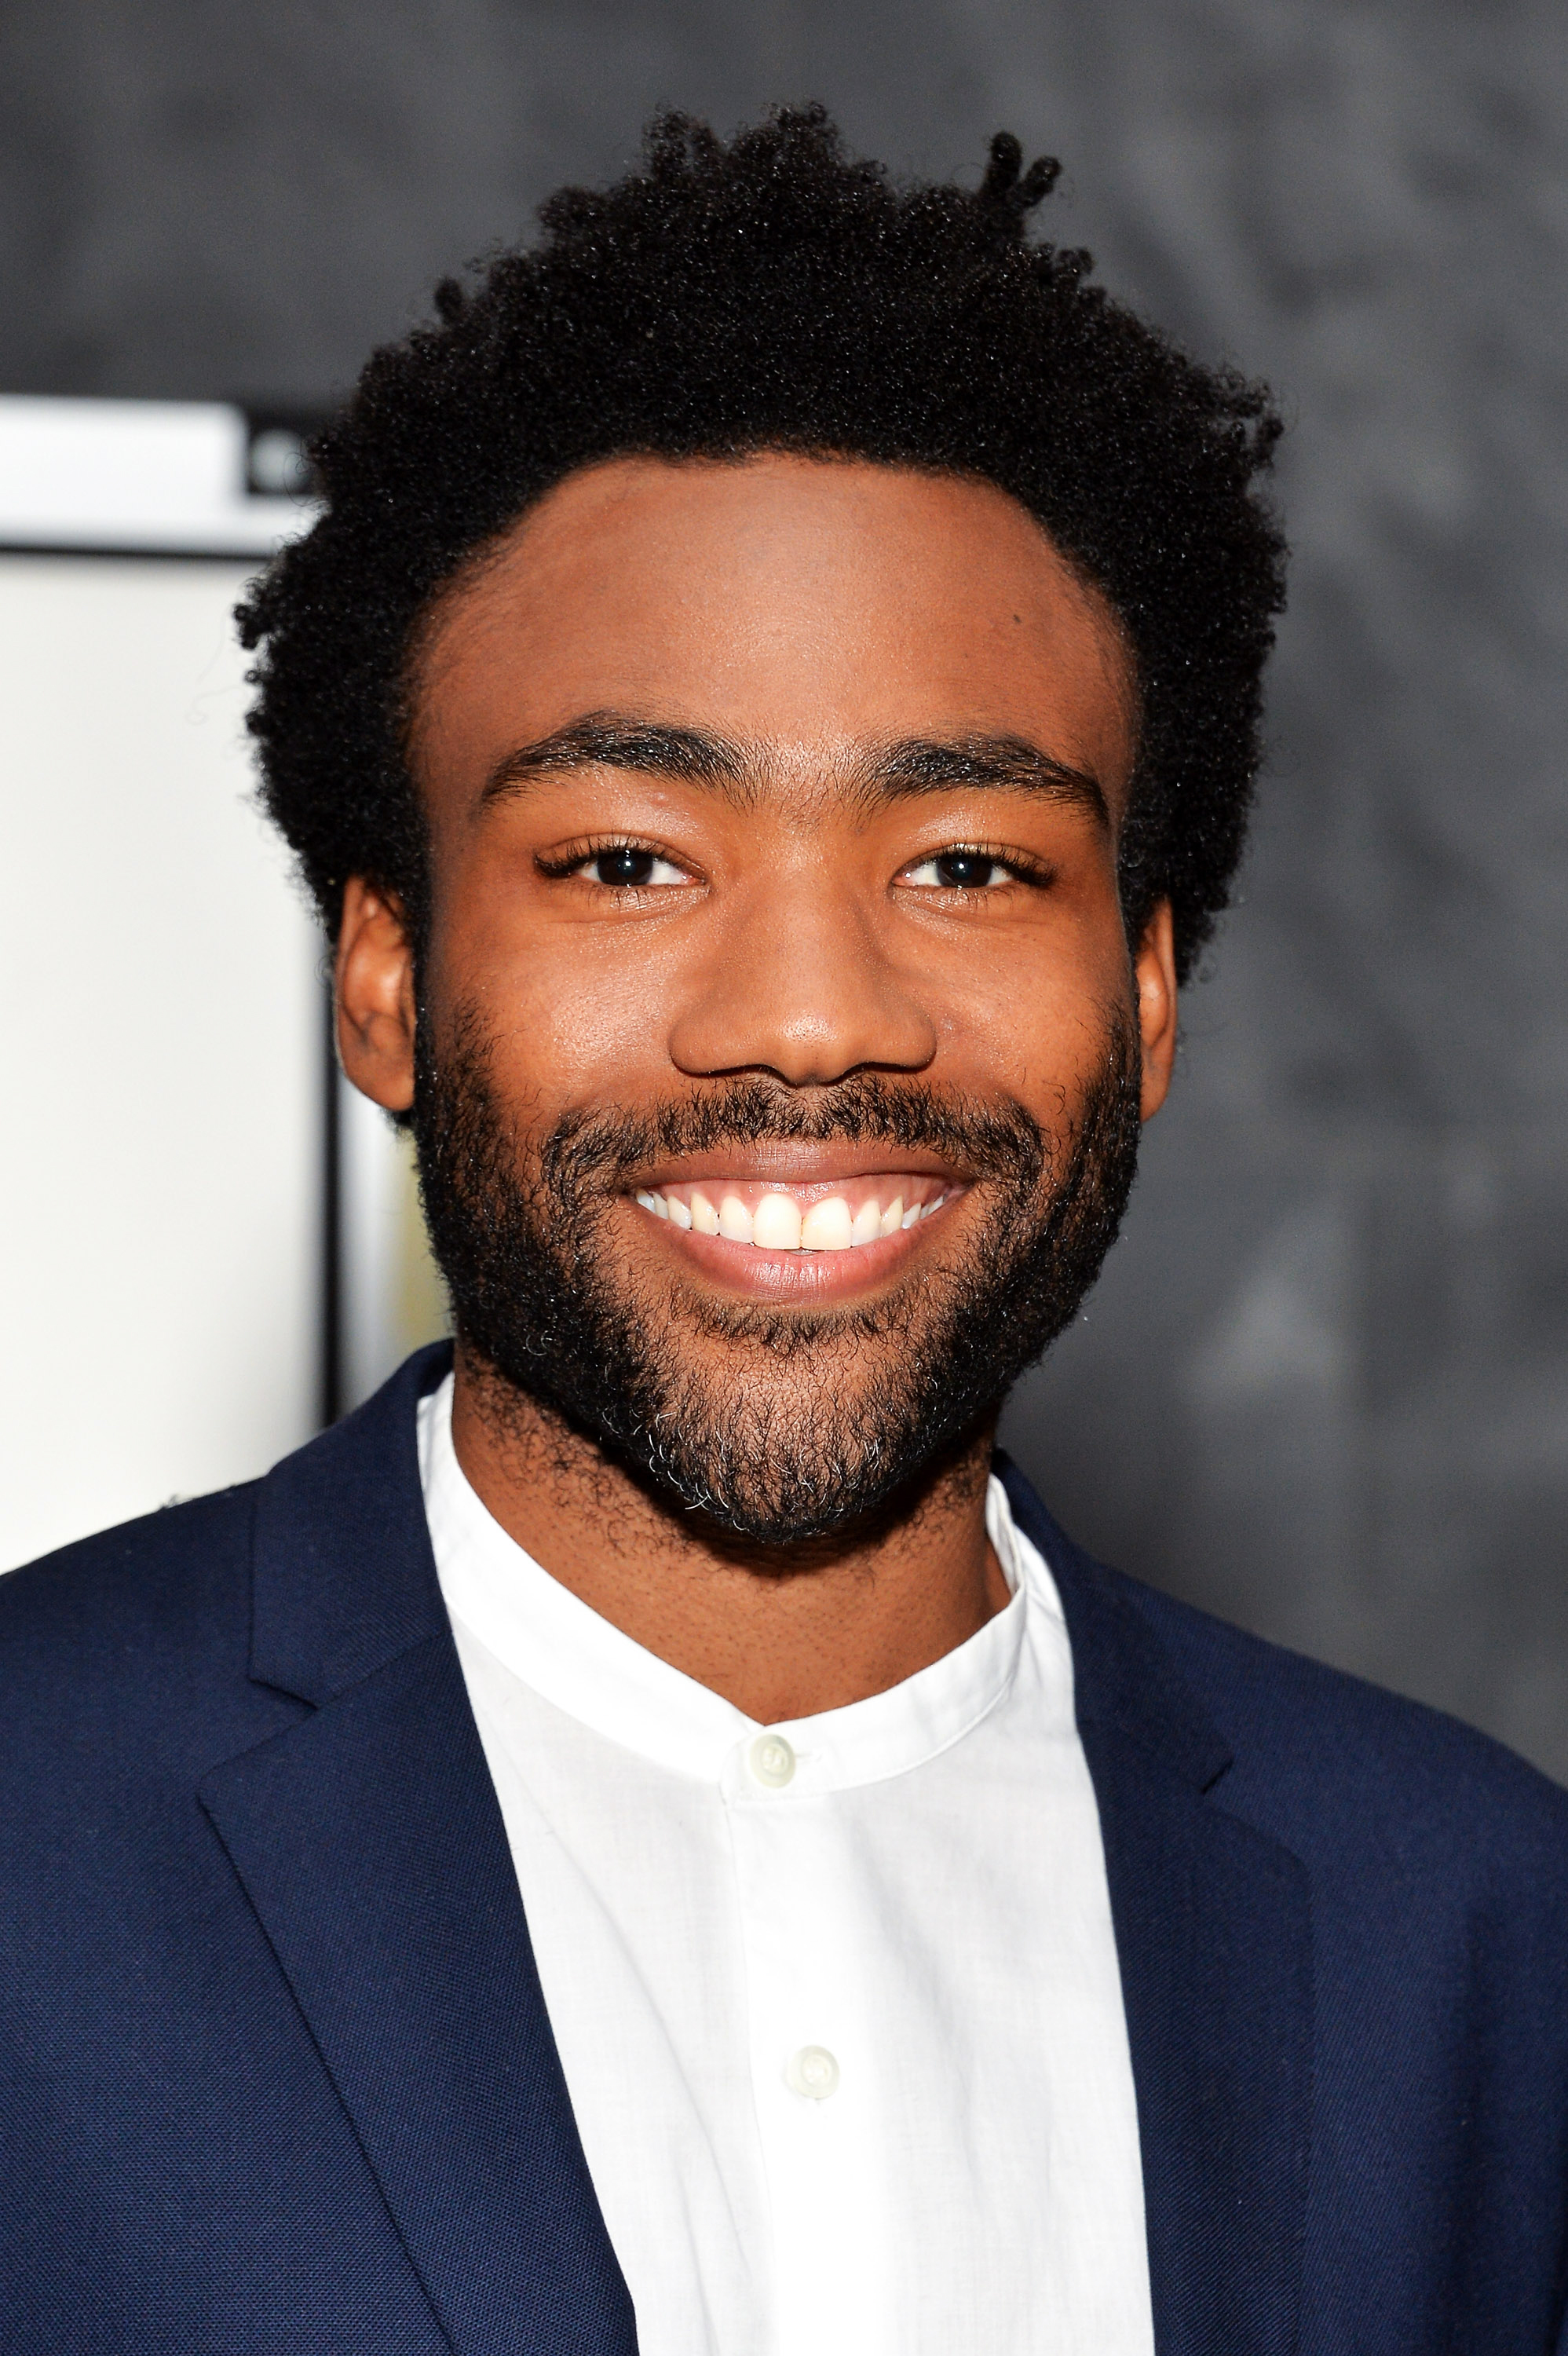 Donald Glover, on Aug. 23, 2016 in New York City. (D. Dipasupil—Getty Images)